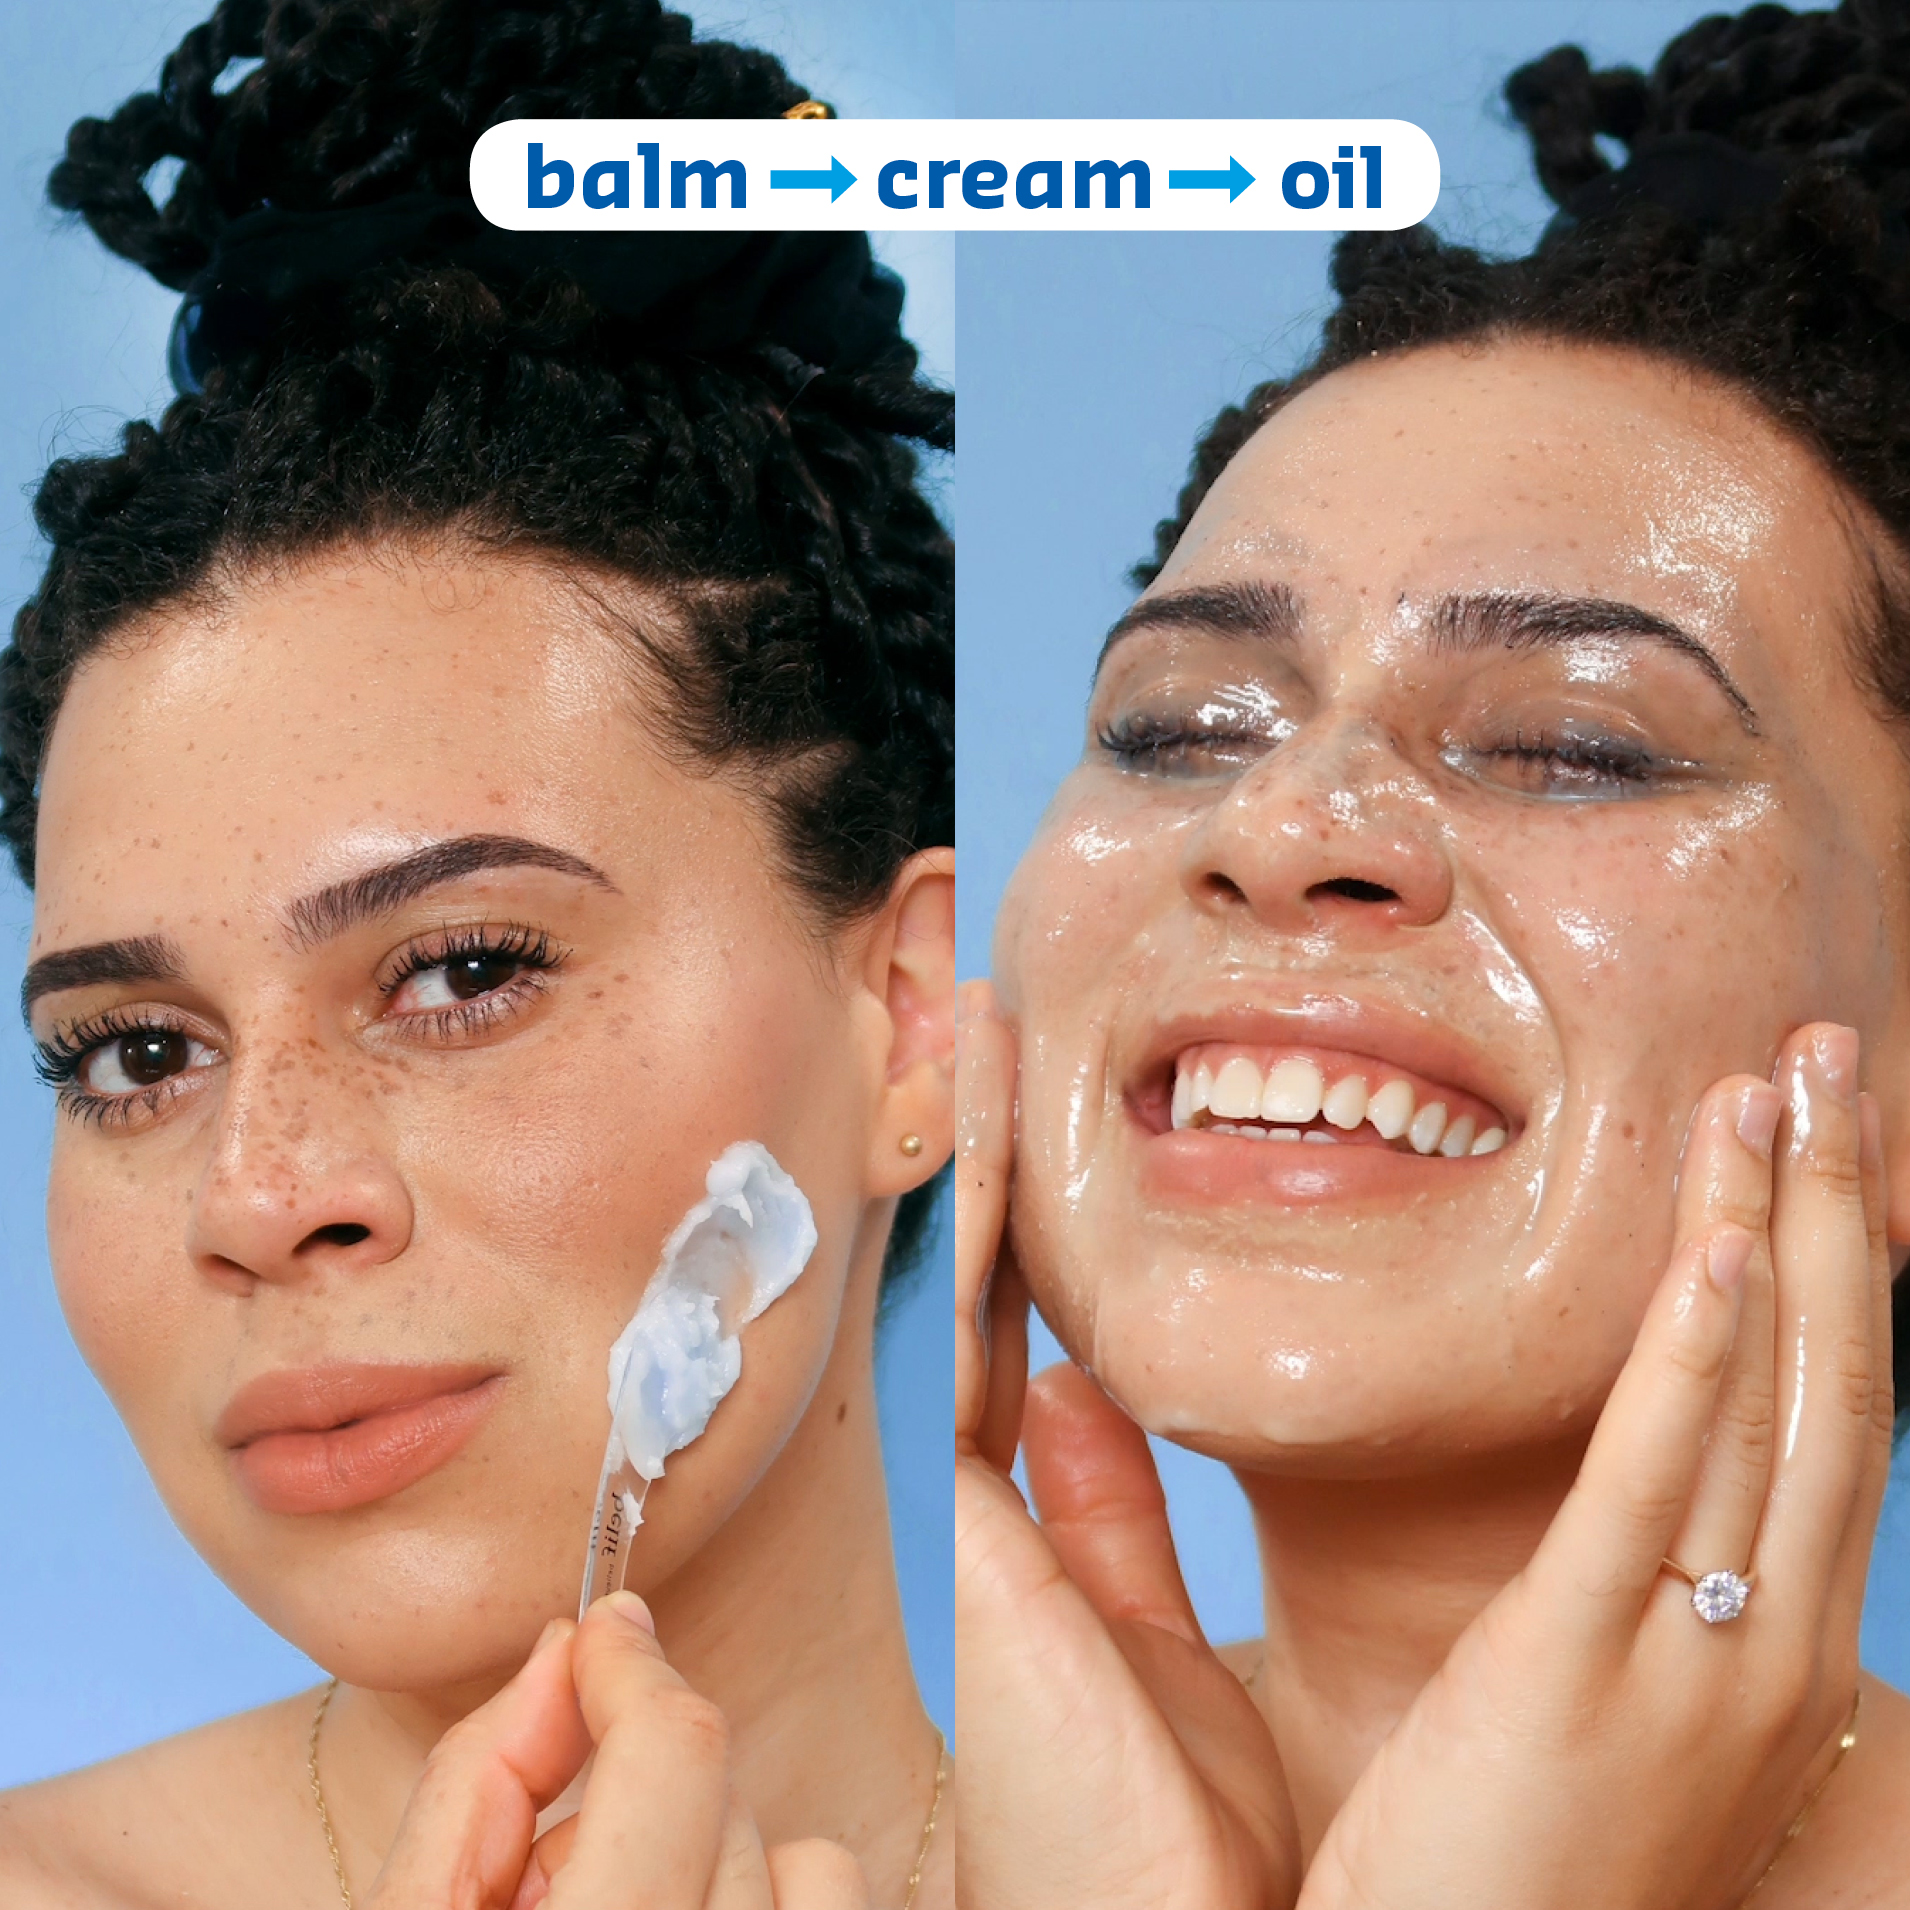 Two photos of a model: in the first one she's looking right at the viewer, applying a bit of balm to her cheek; on the second one, she's smiling with her eyes closed and her chin up a bit and applying oil to her face